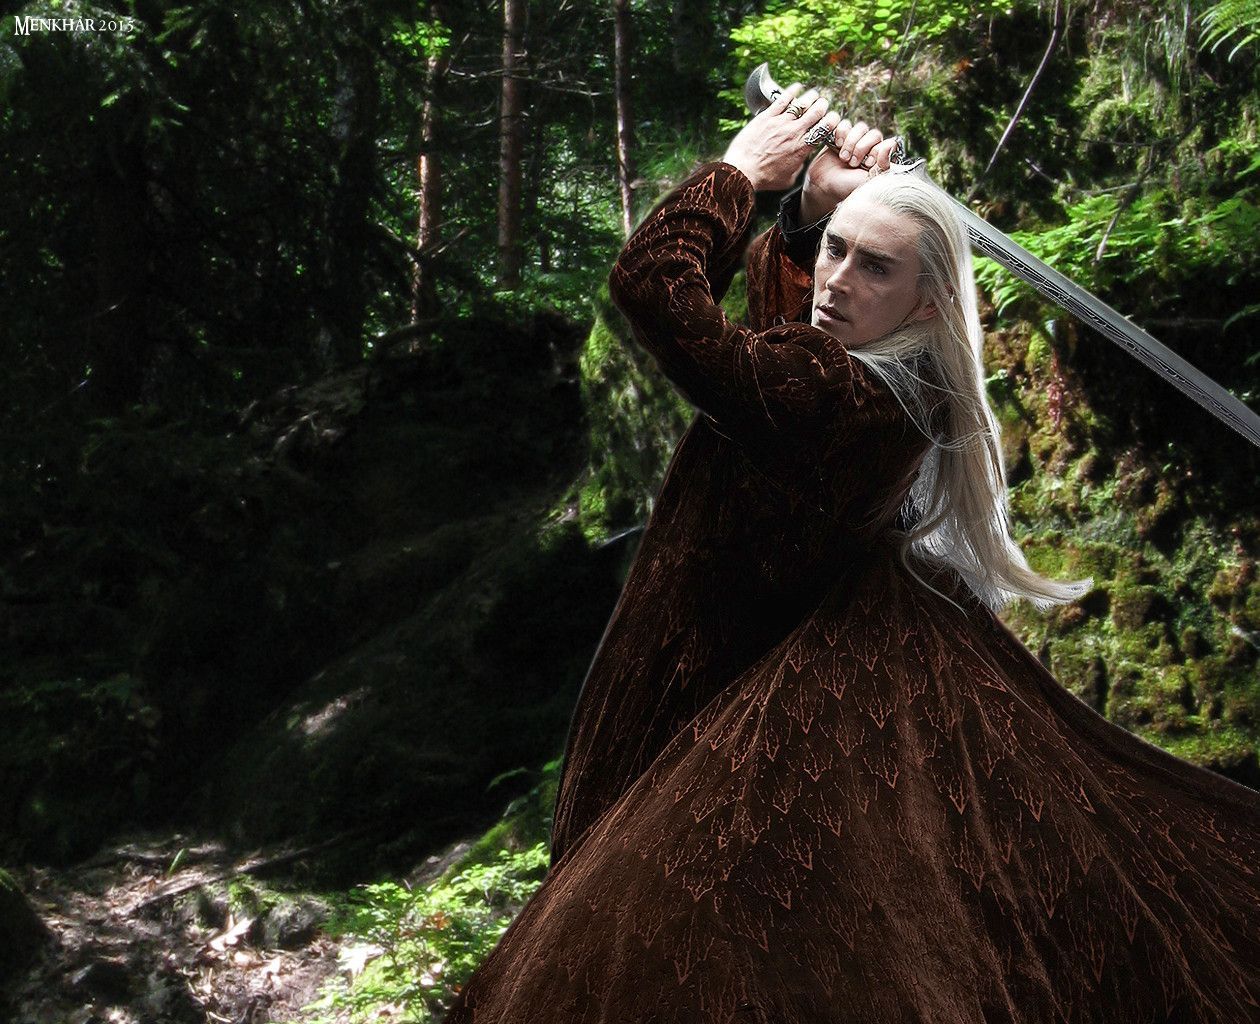 Thranduil - the best warrior in the Middle Earth by Menkhar